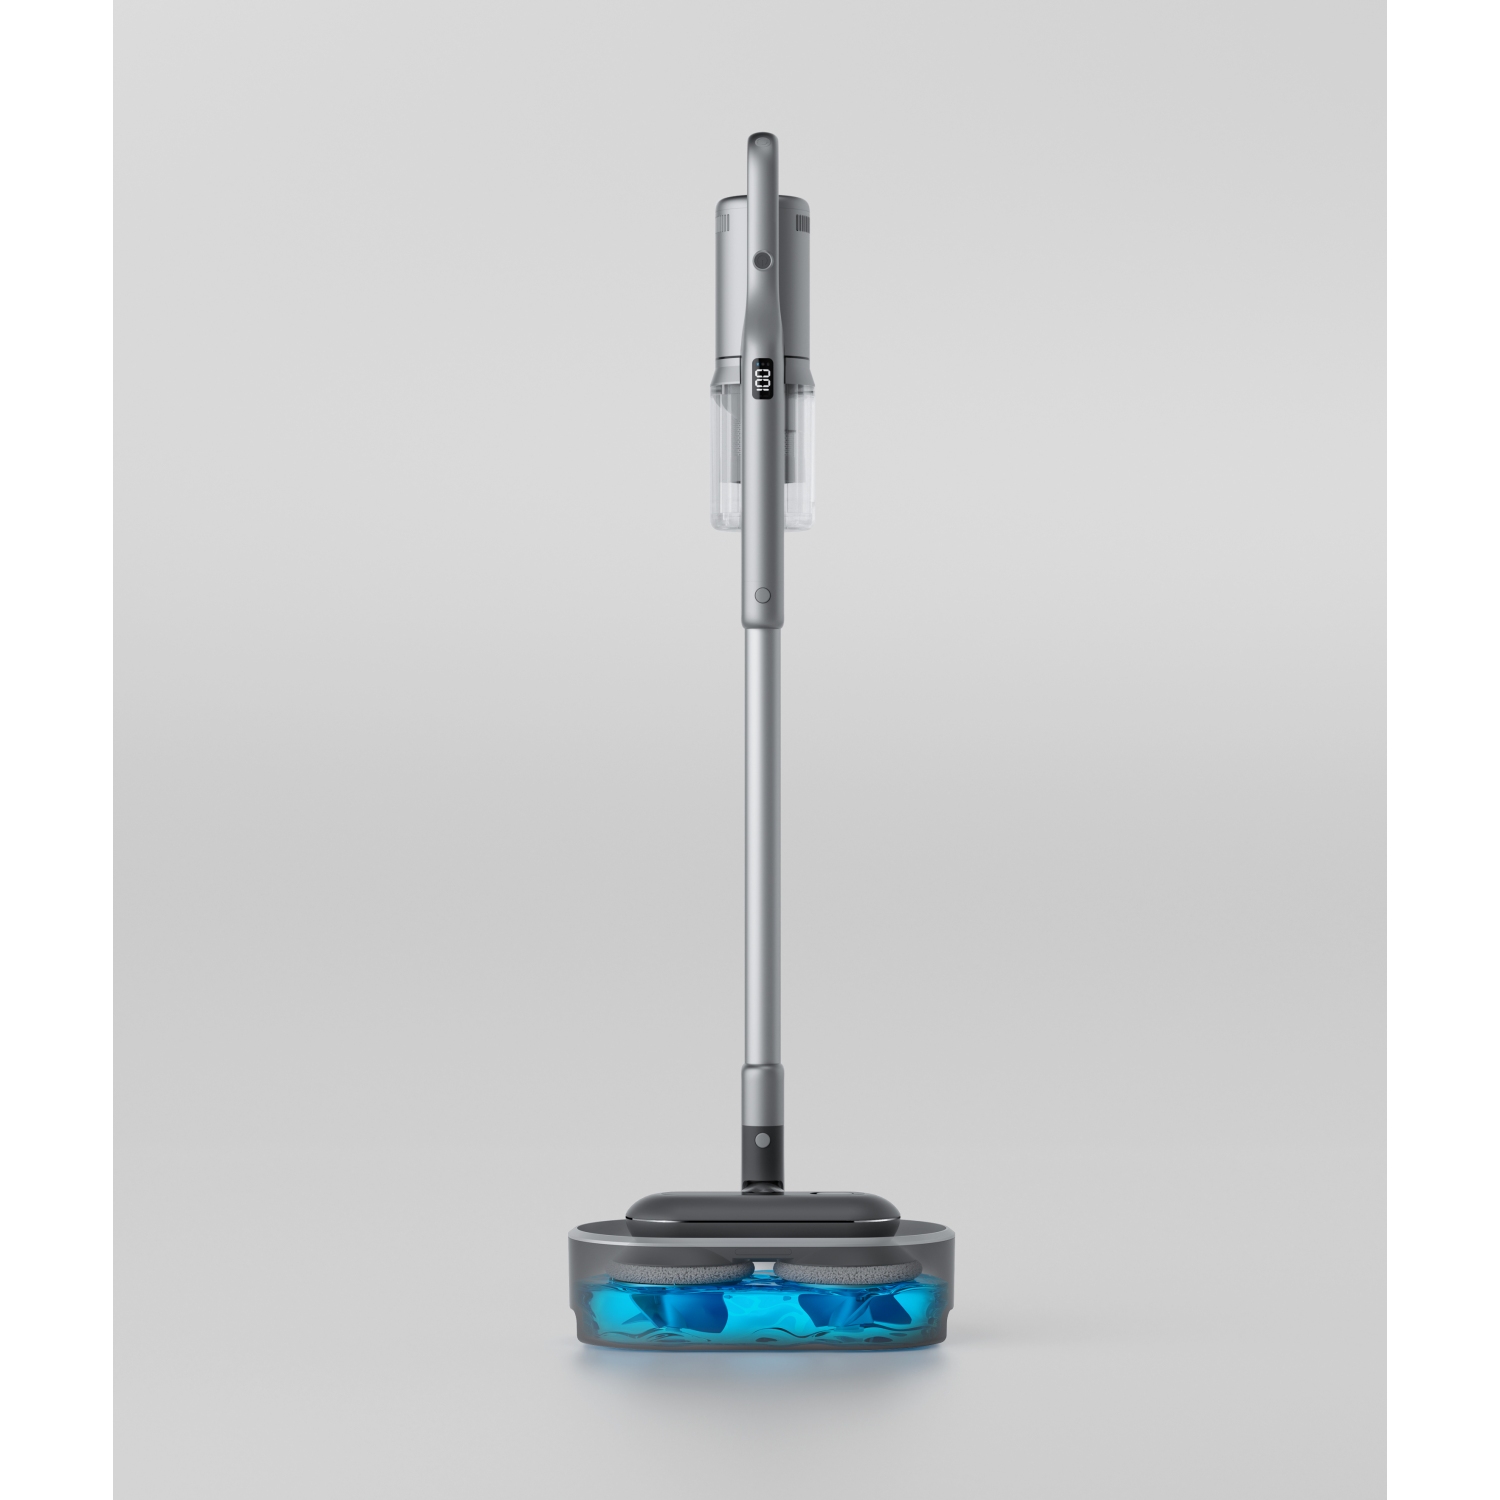 Roidmi X30VX Pro Cordless Vacuum Cleaner with OLED colour display & App - 80 Minutes Run Time - Silver - 0